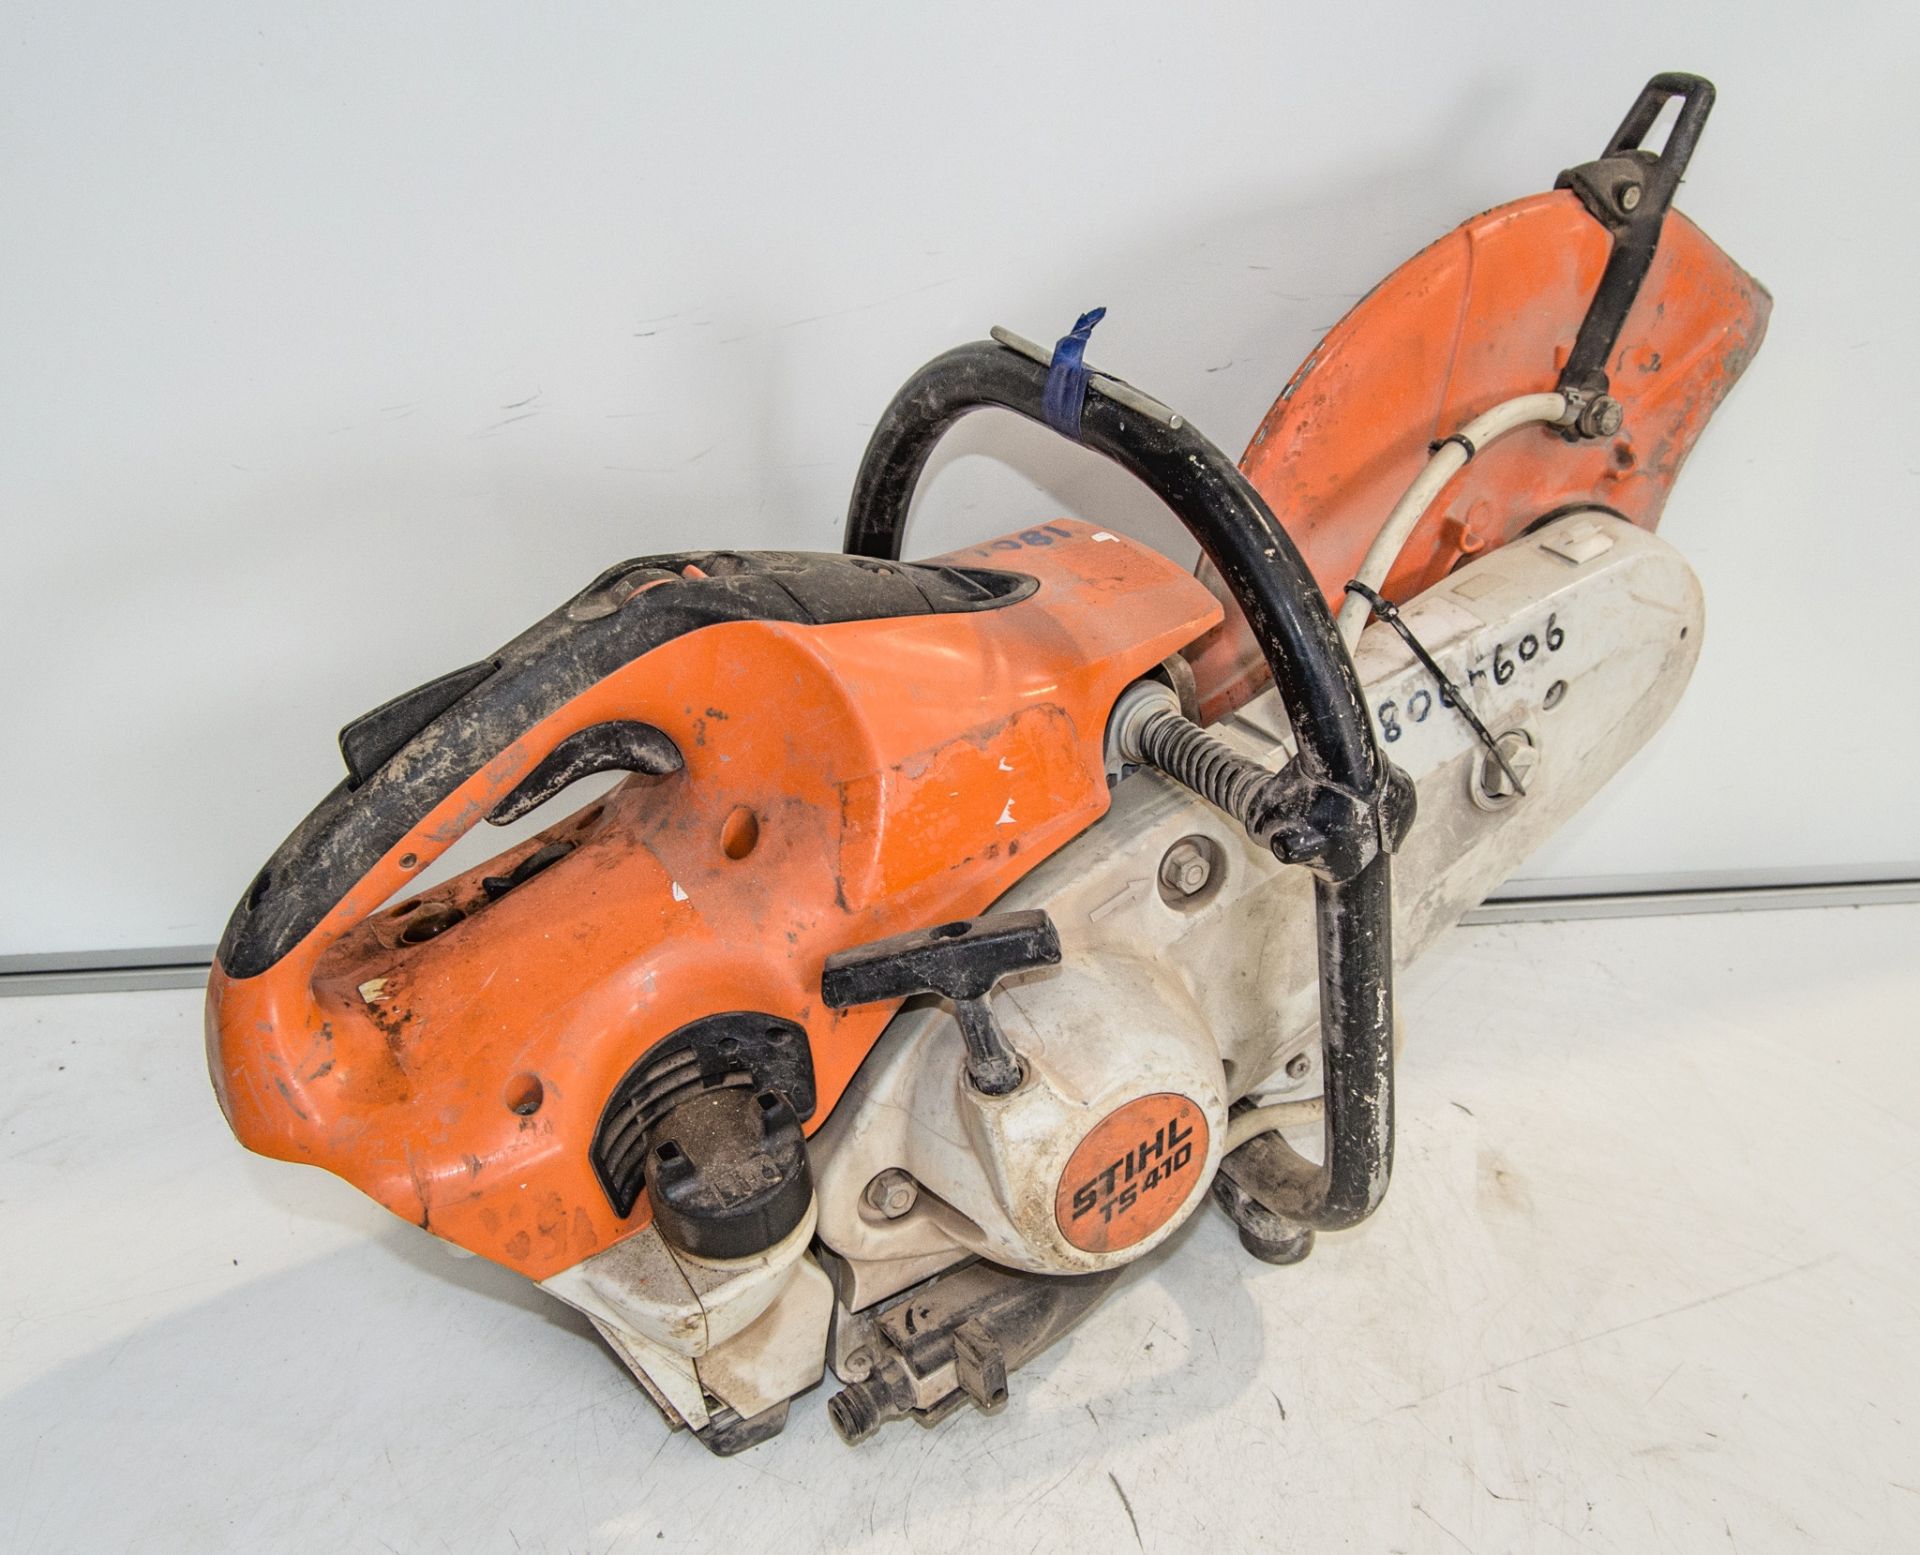 Stihl TS410 petrol driven cut off saw ** Rear cover missing ** 18065606 - Image 2 of 2